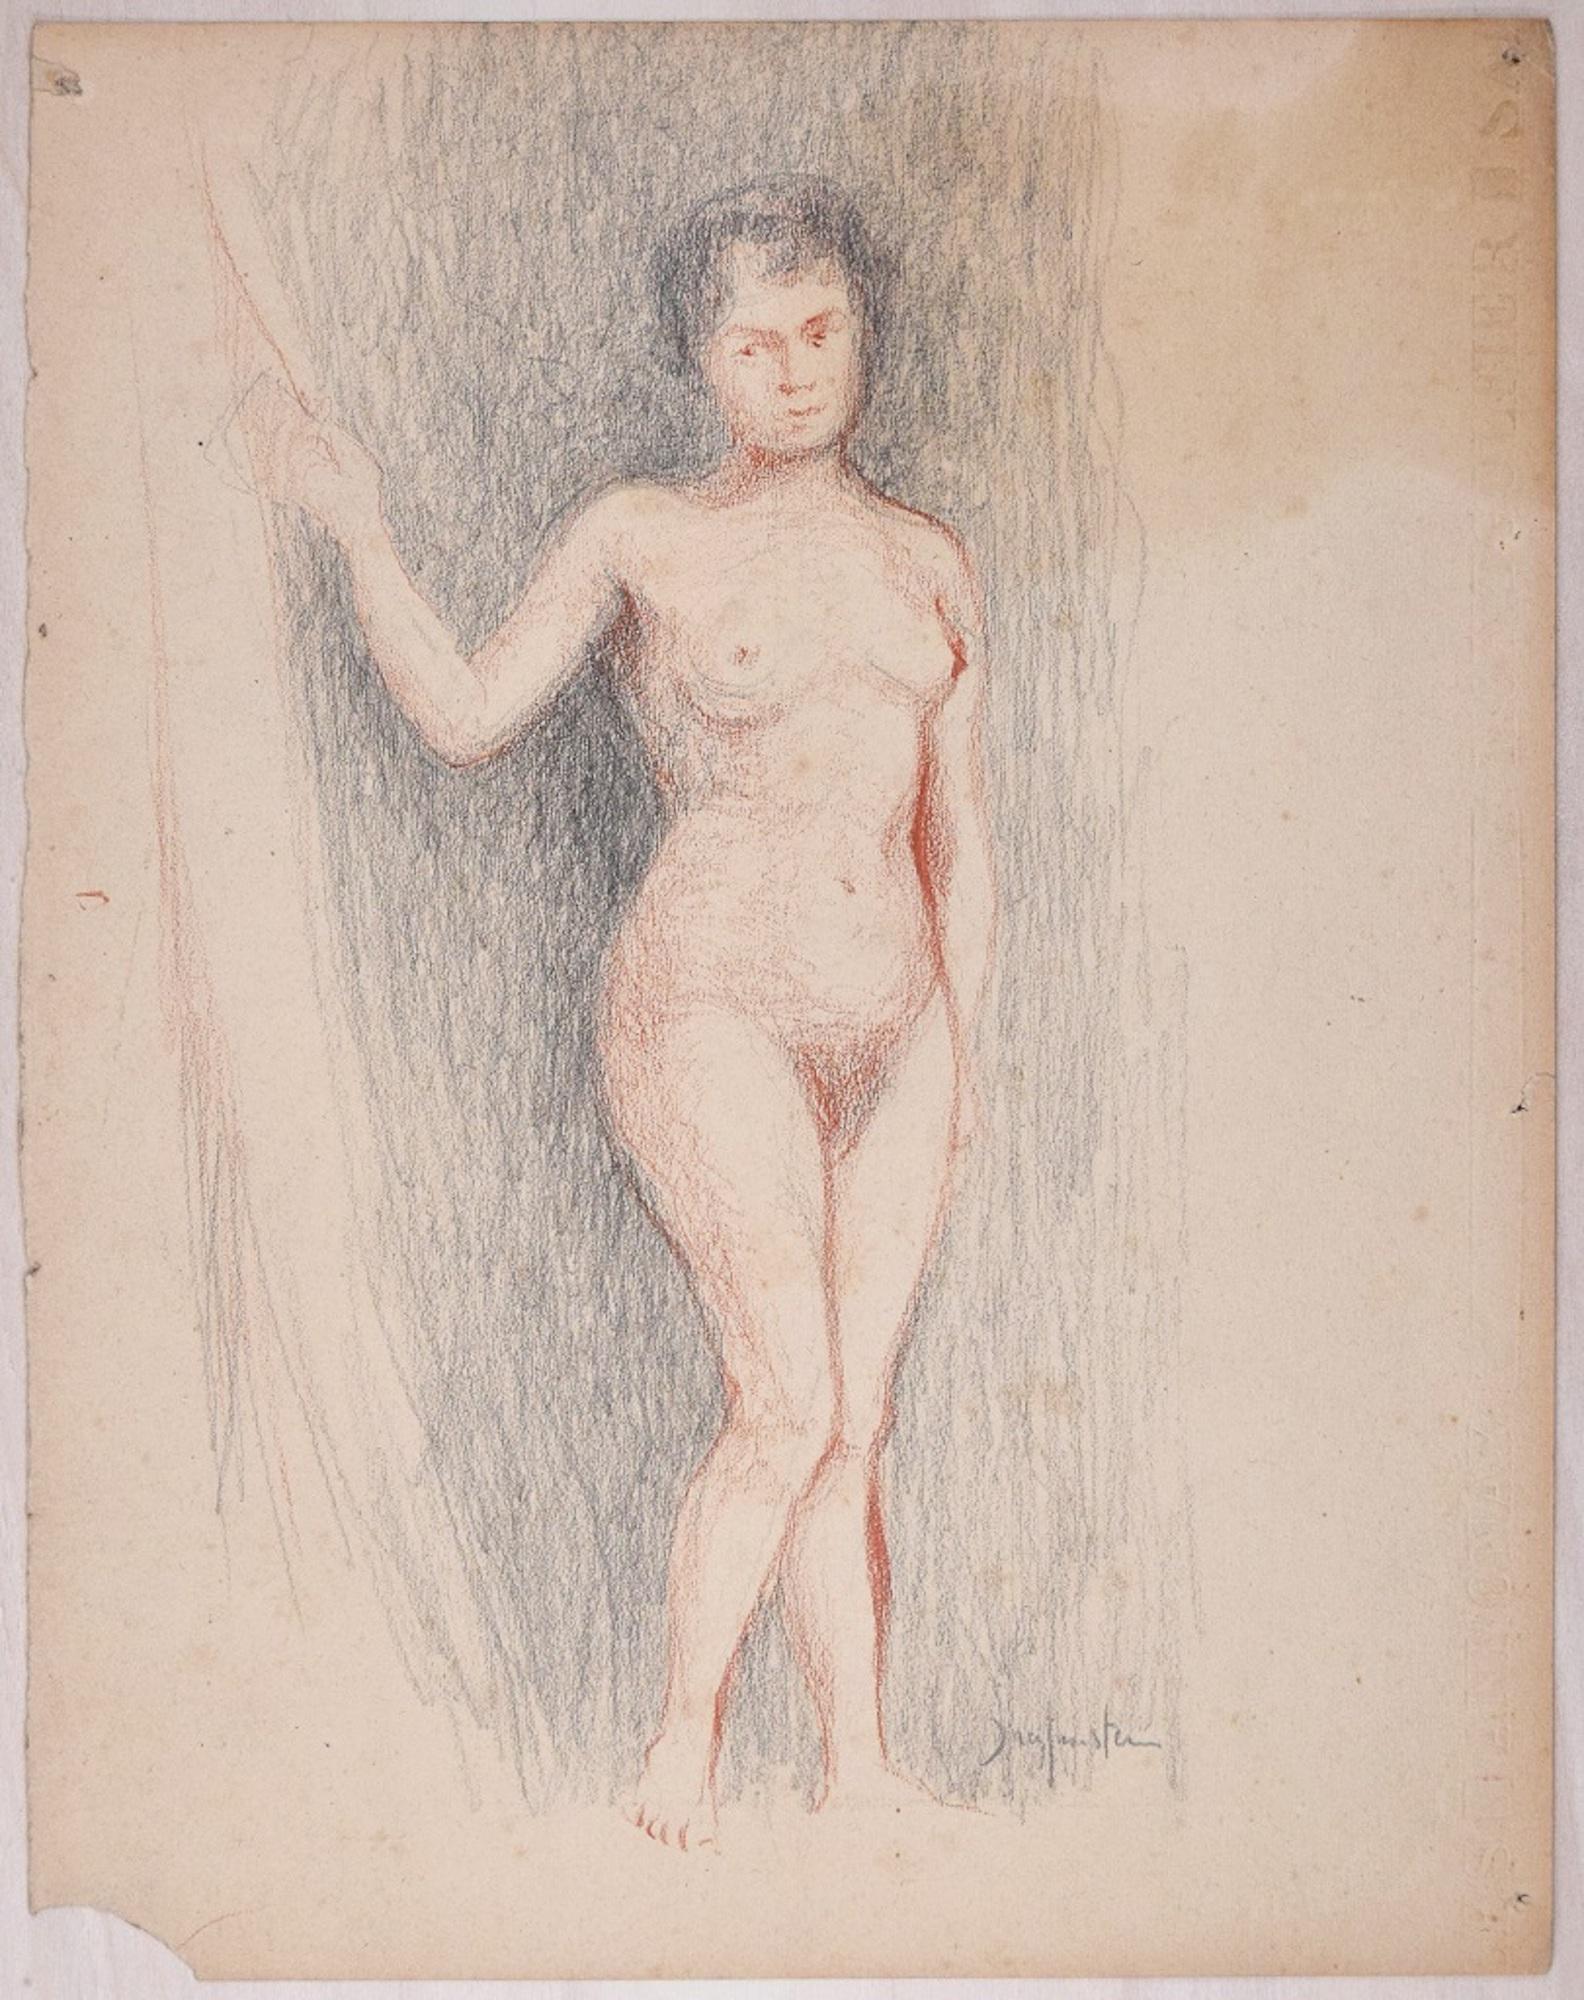 Sketches of a Nude - Original Pencil and Pastel Drawing by J. Dreyfus-Stern 